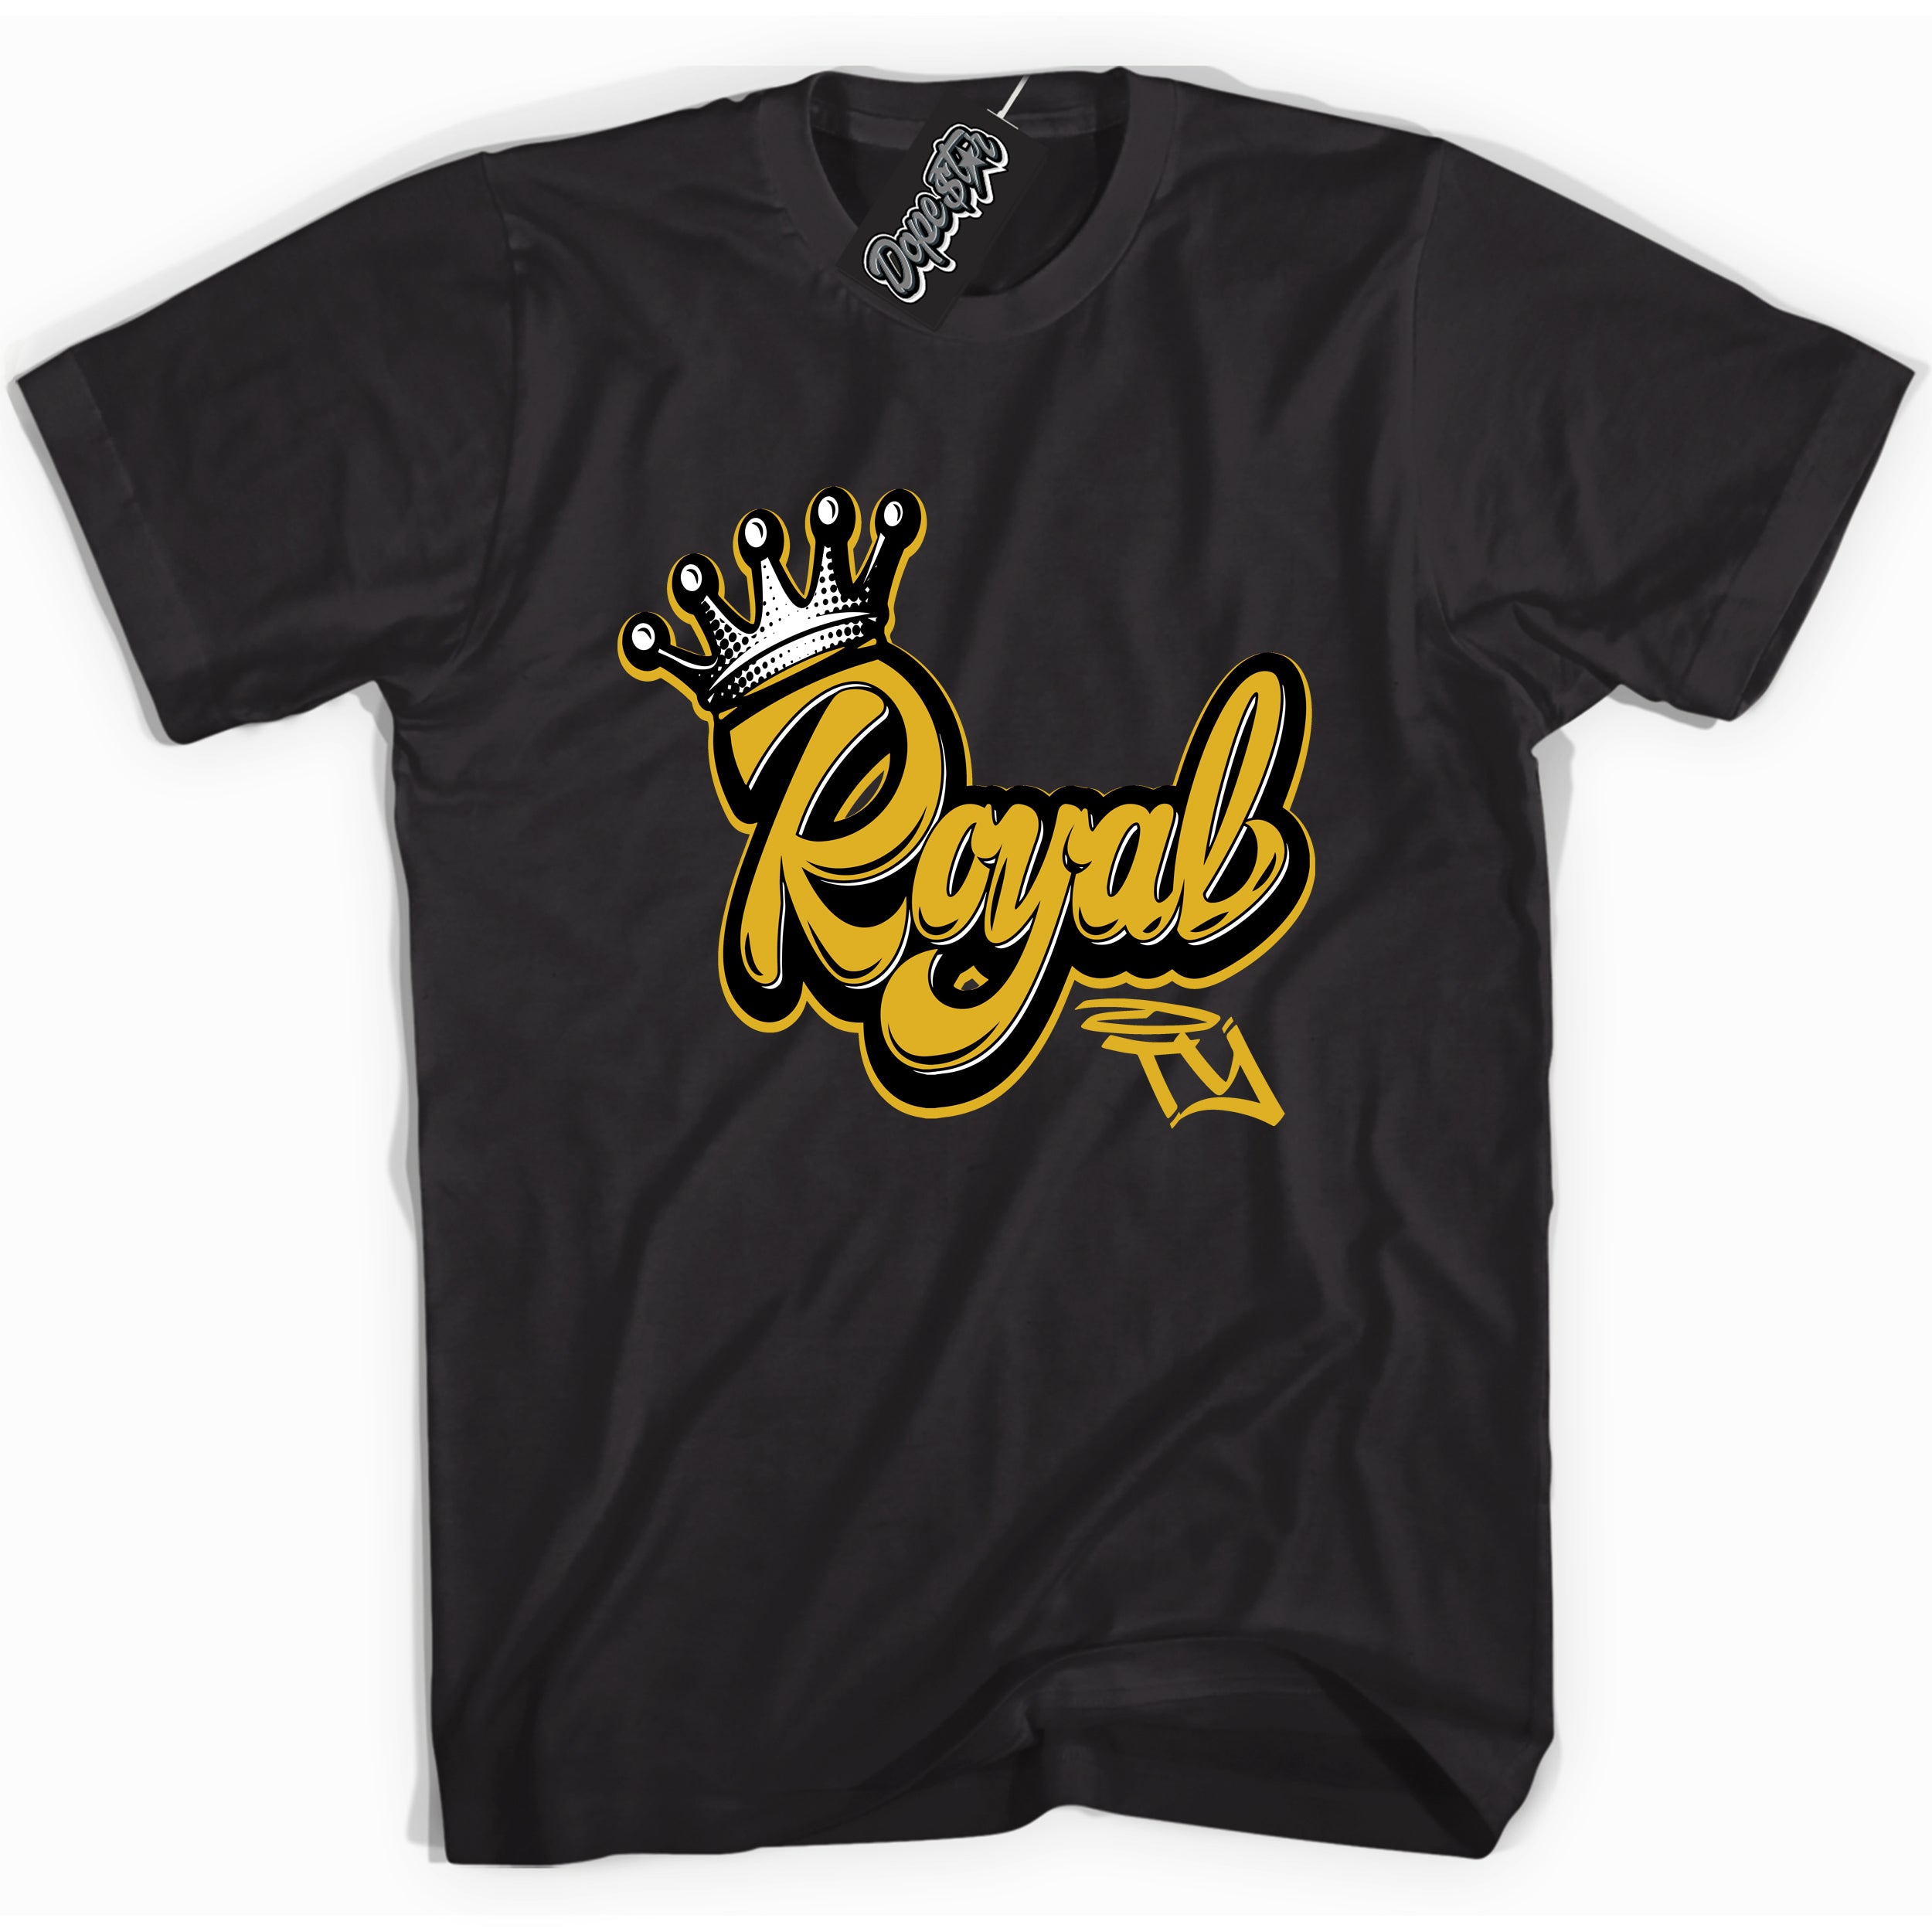 Cool Black Shirt with “ Royalty ” design that perfectly matches Yellow Ochre 6s Sneakers.